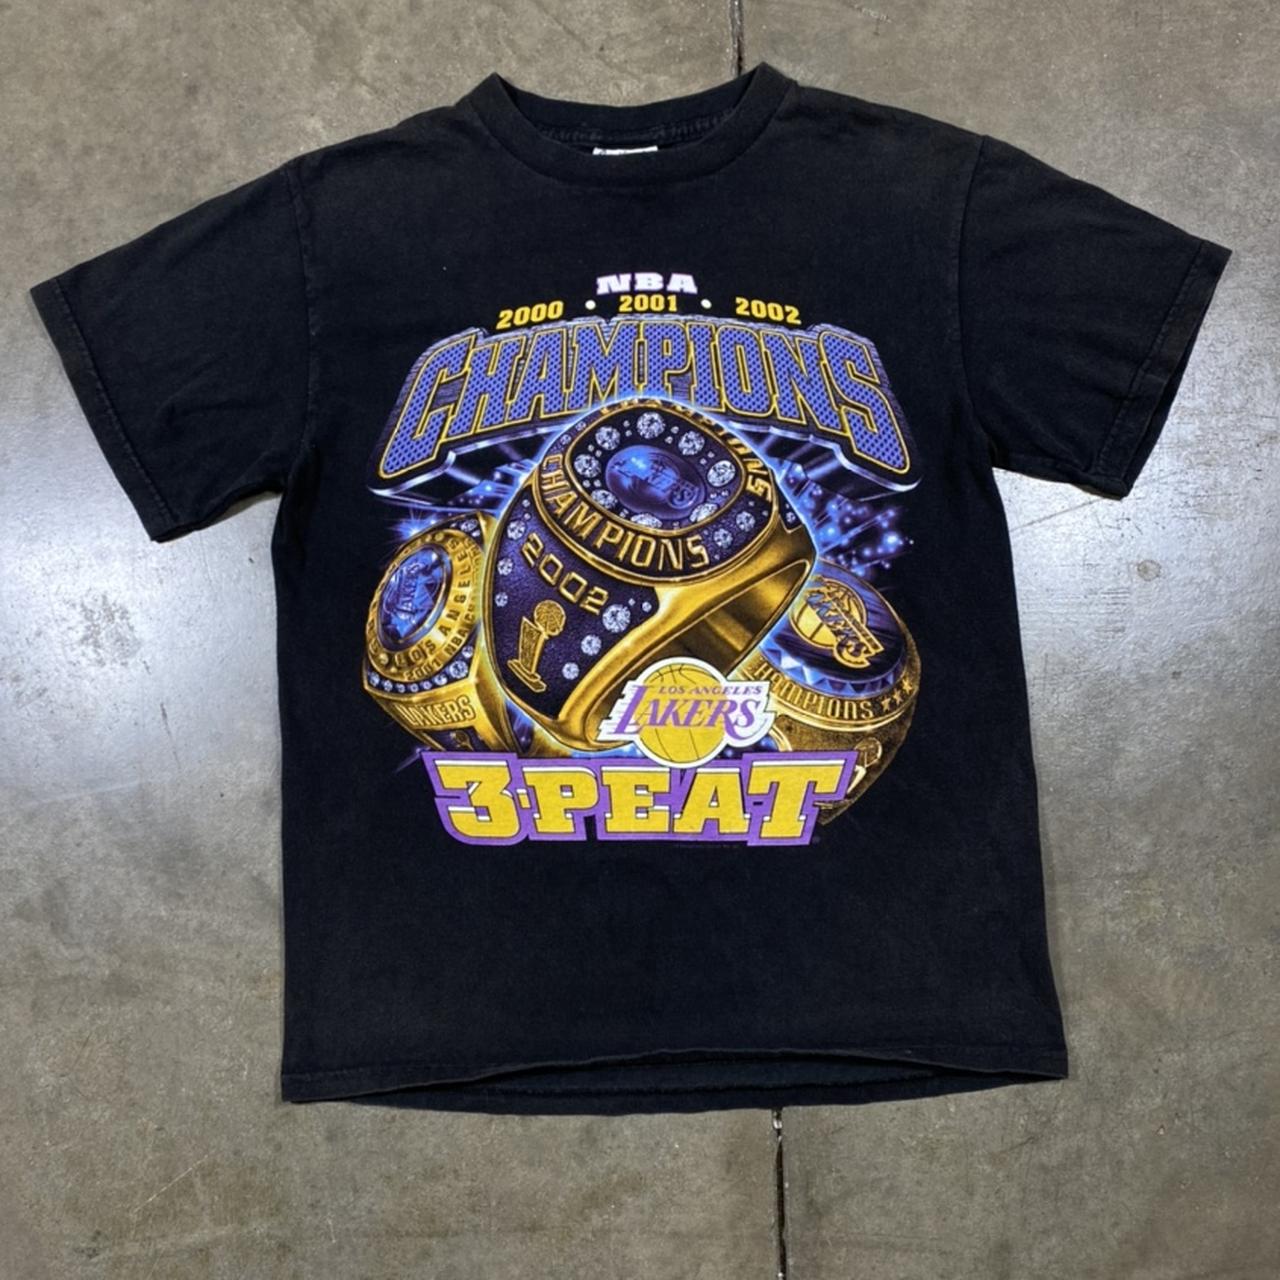 Vintage Lakers Kobe Playoffs T-shirt – For All To Envy